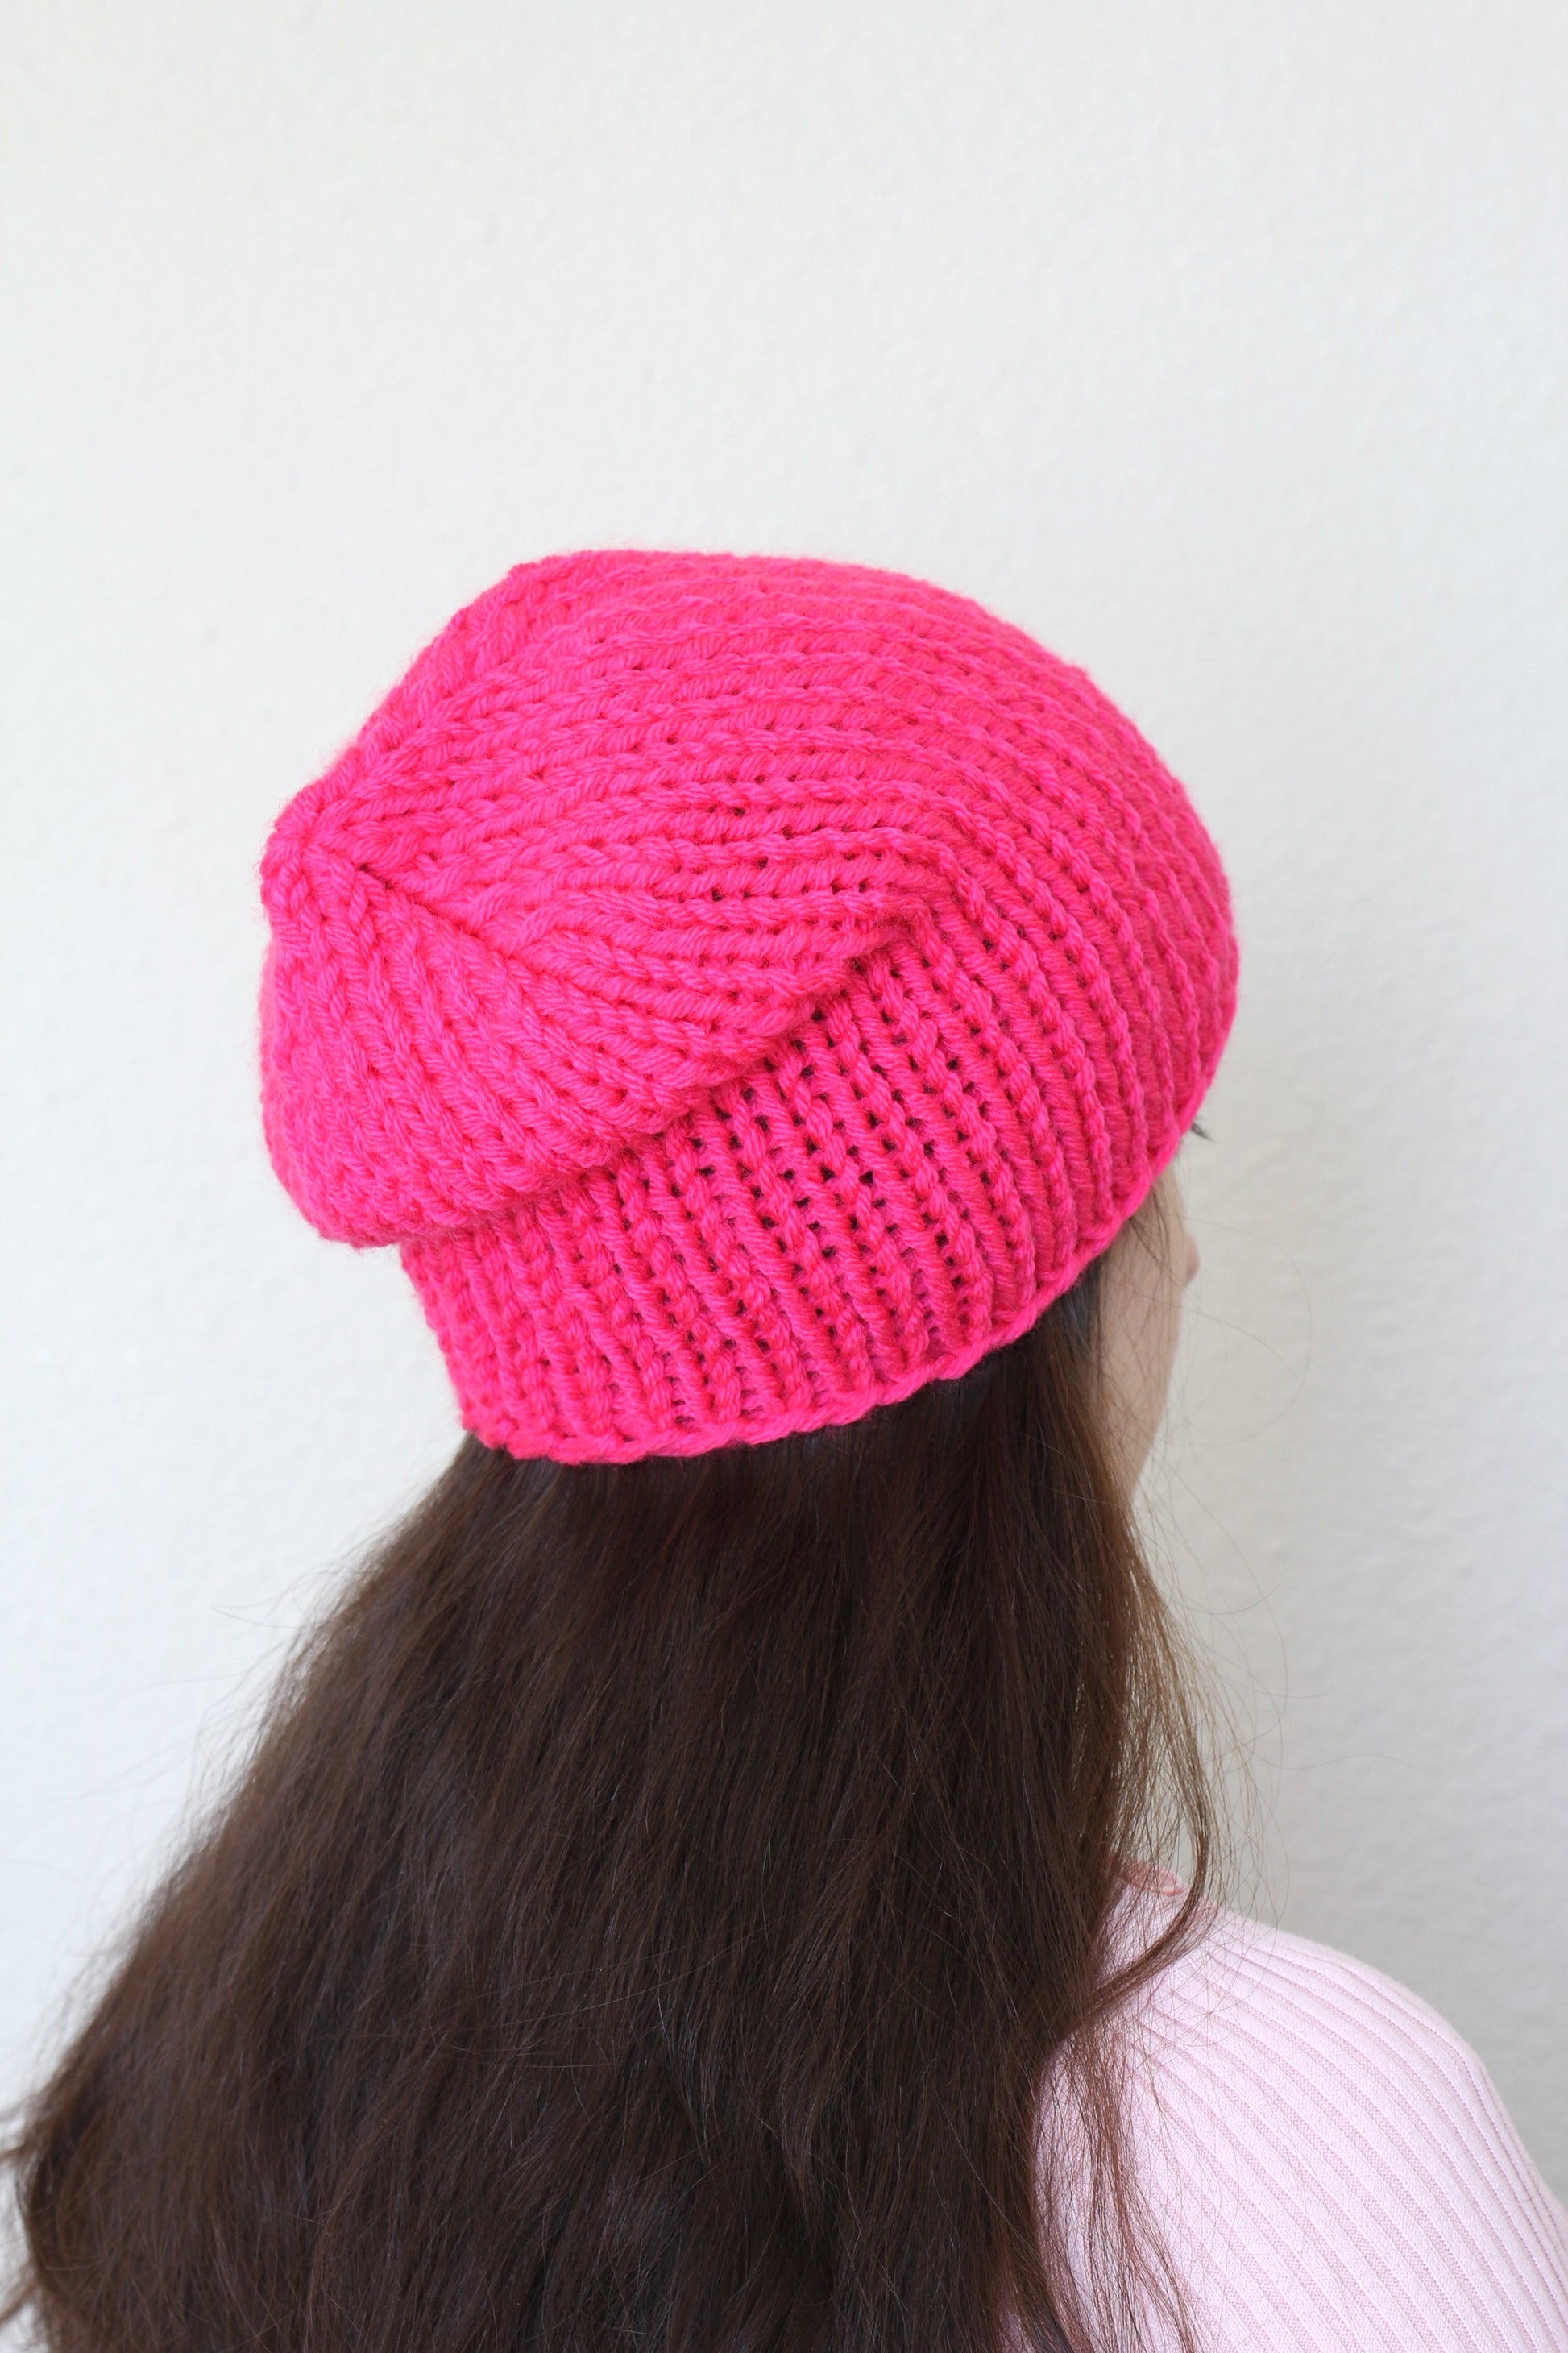 Beanie hat, knit hat, slouchy hat, knit beanie in burgundy color